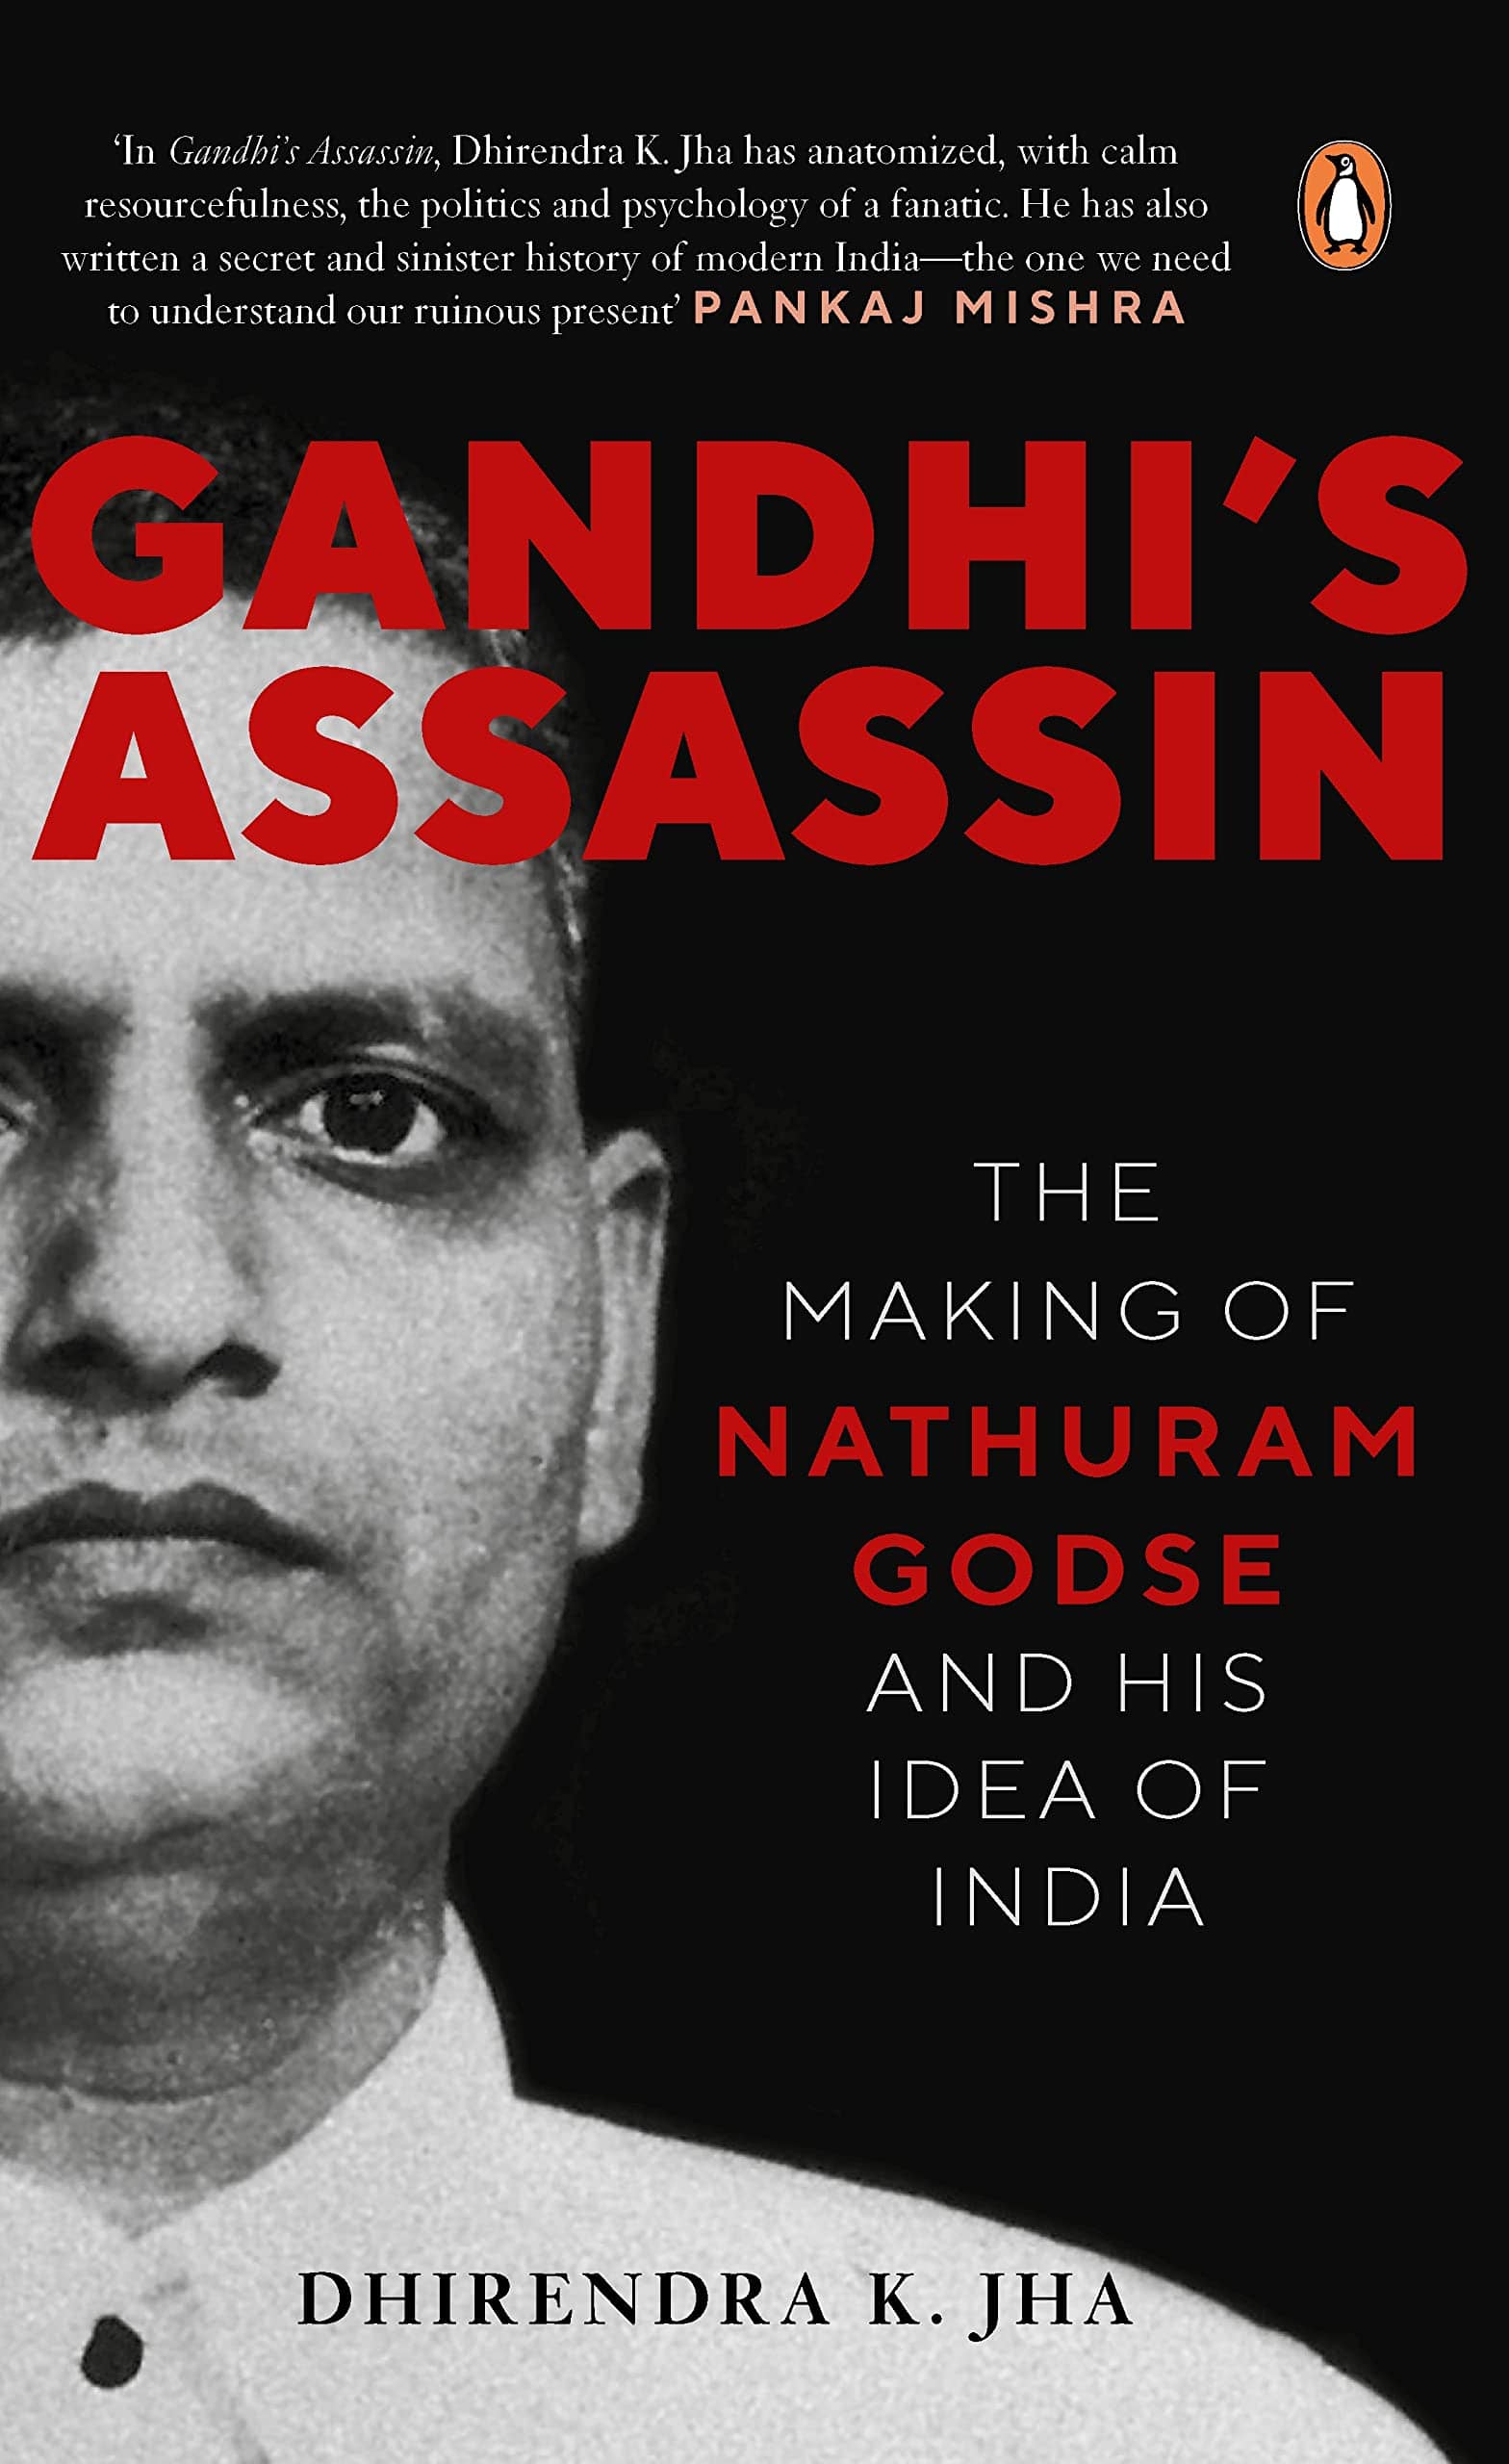 Gandhi's Assassin: The Making Of Nathuram Godse And His Idea Of India by Dhirendra K Jha